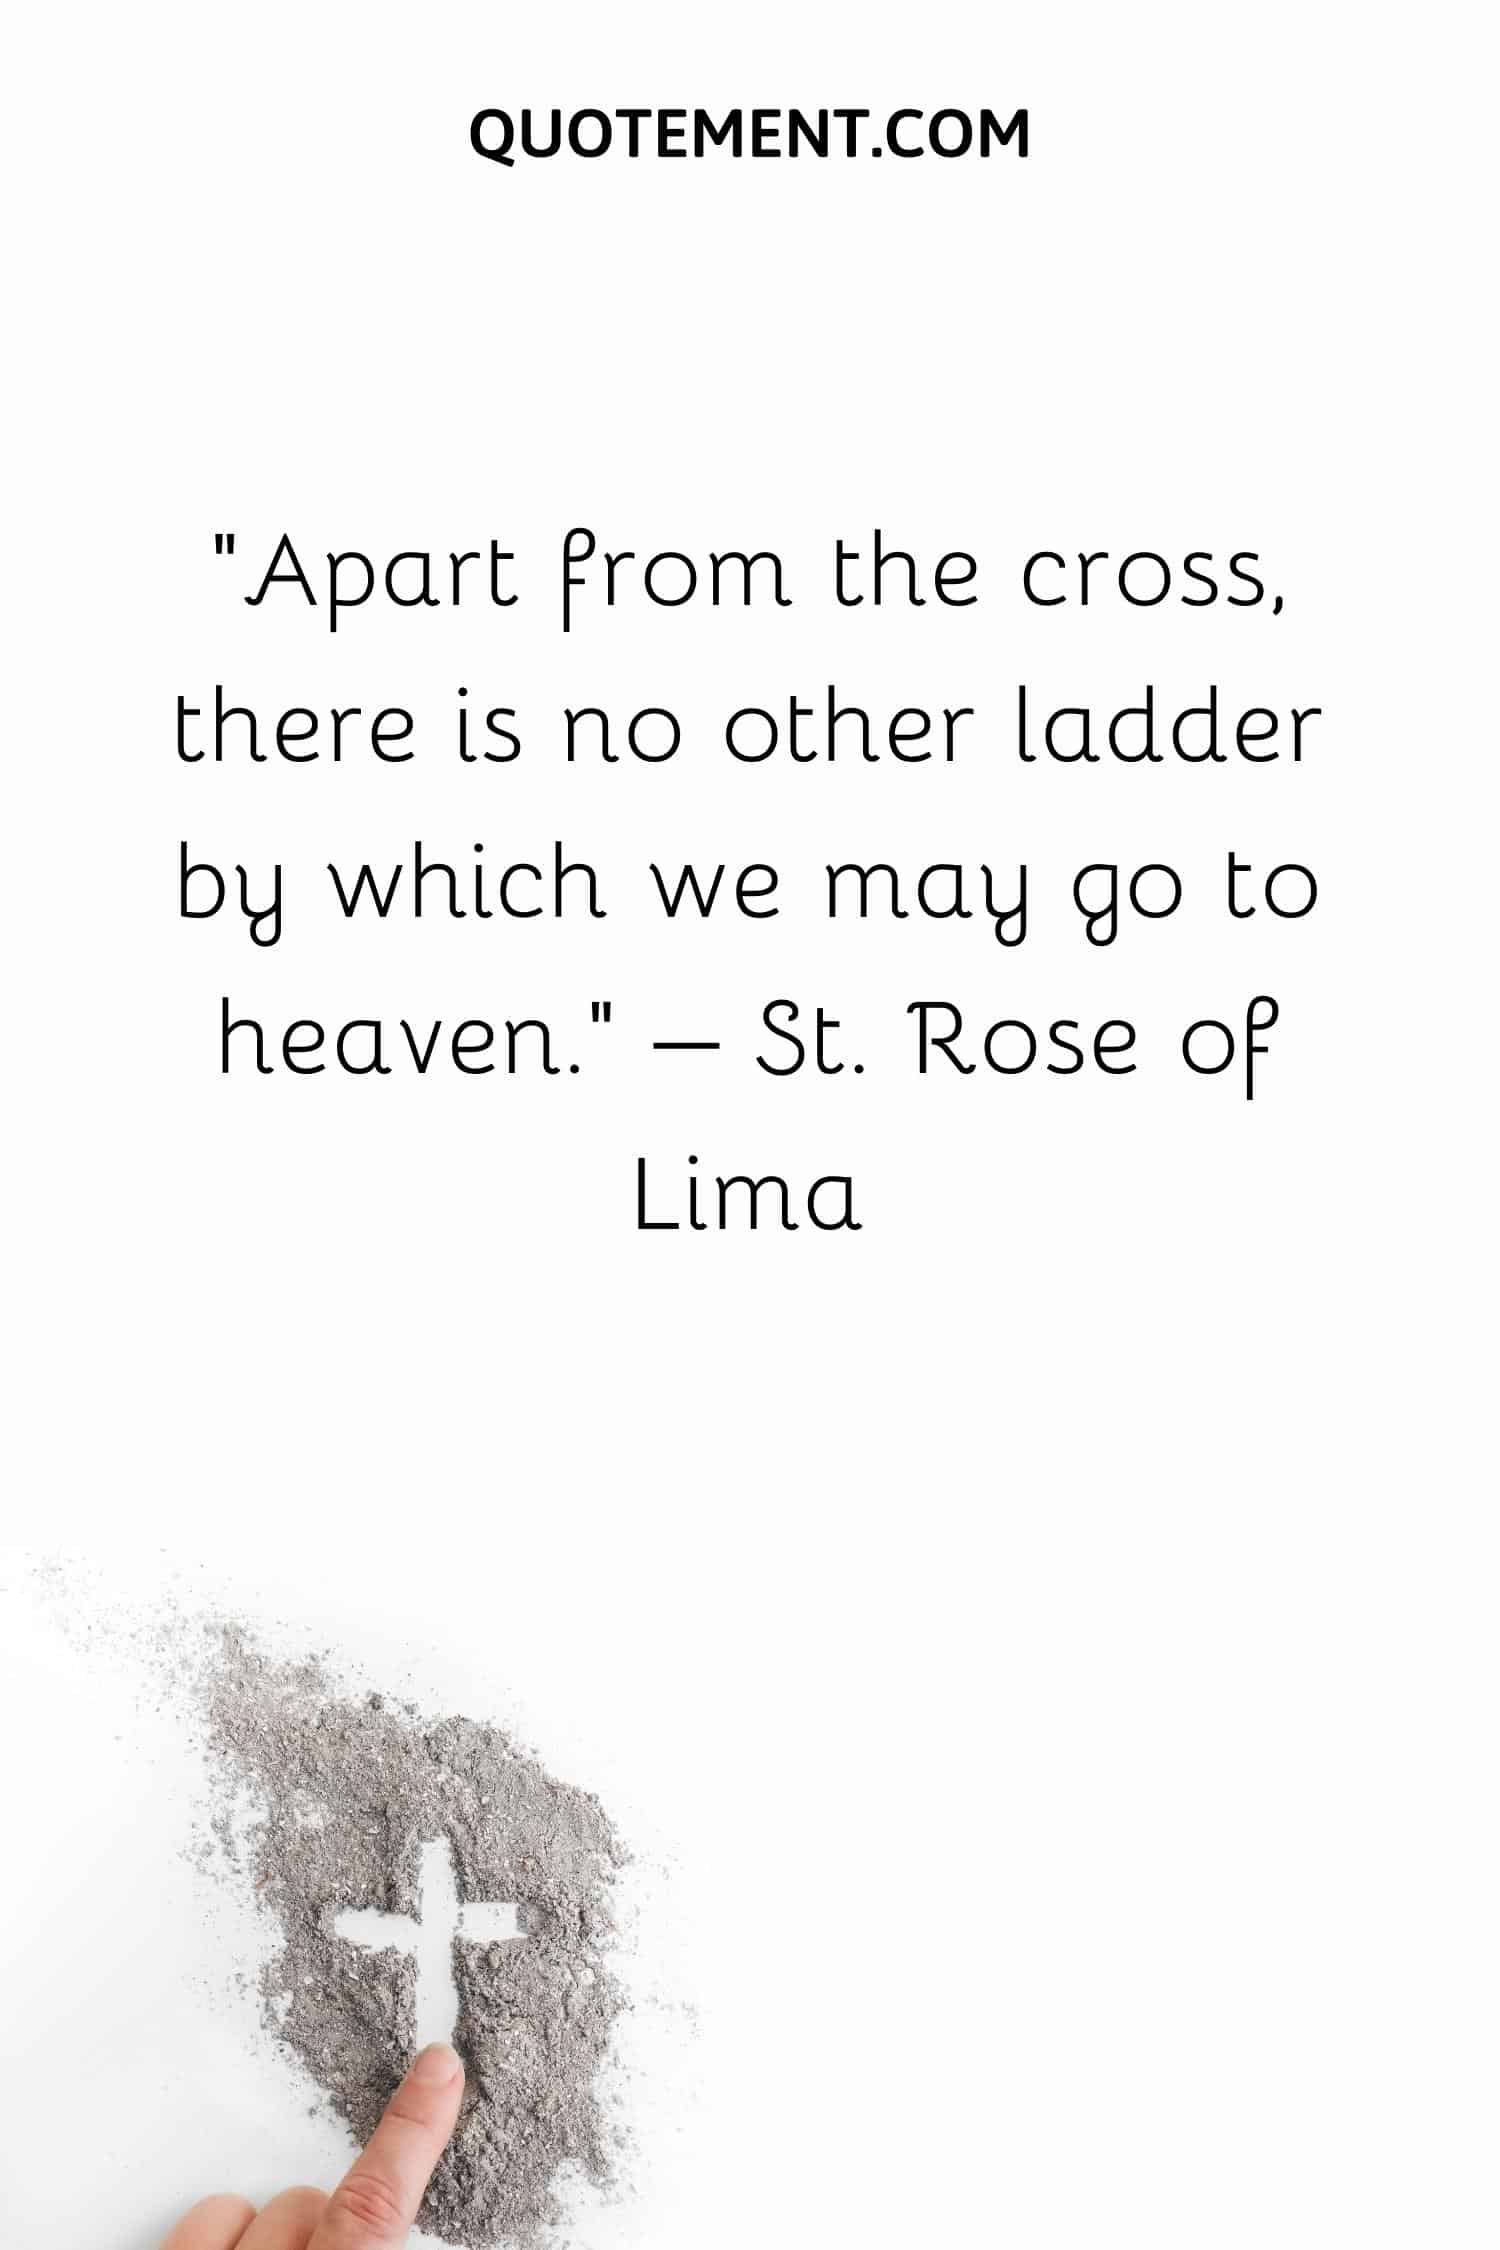 Apart from the cross, there is no other ladder by which we may go to heaven